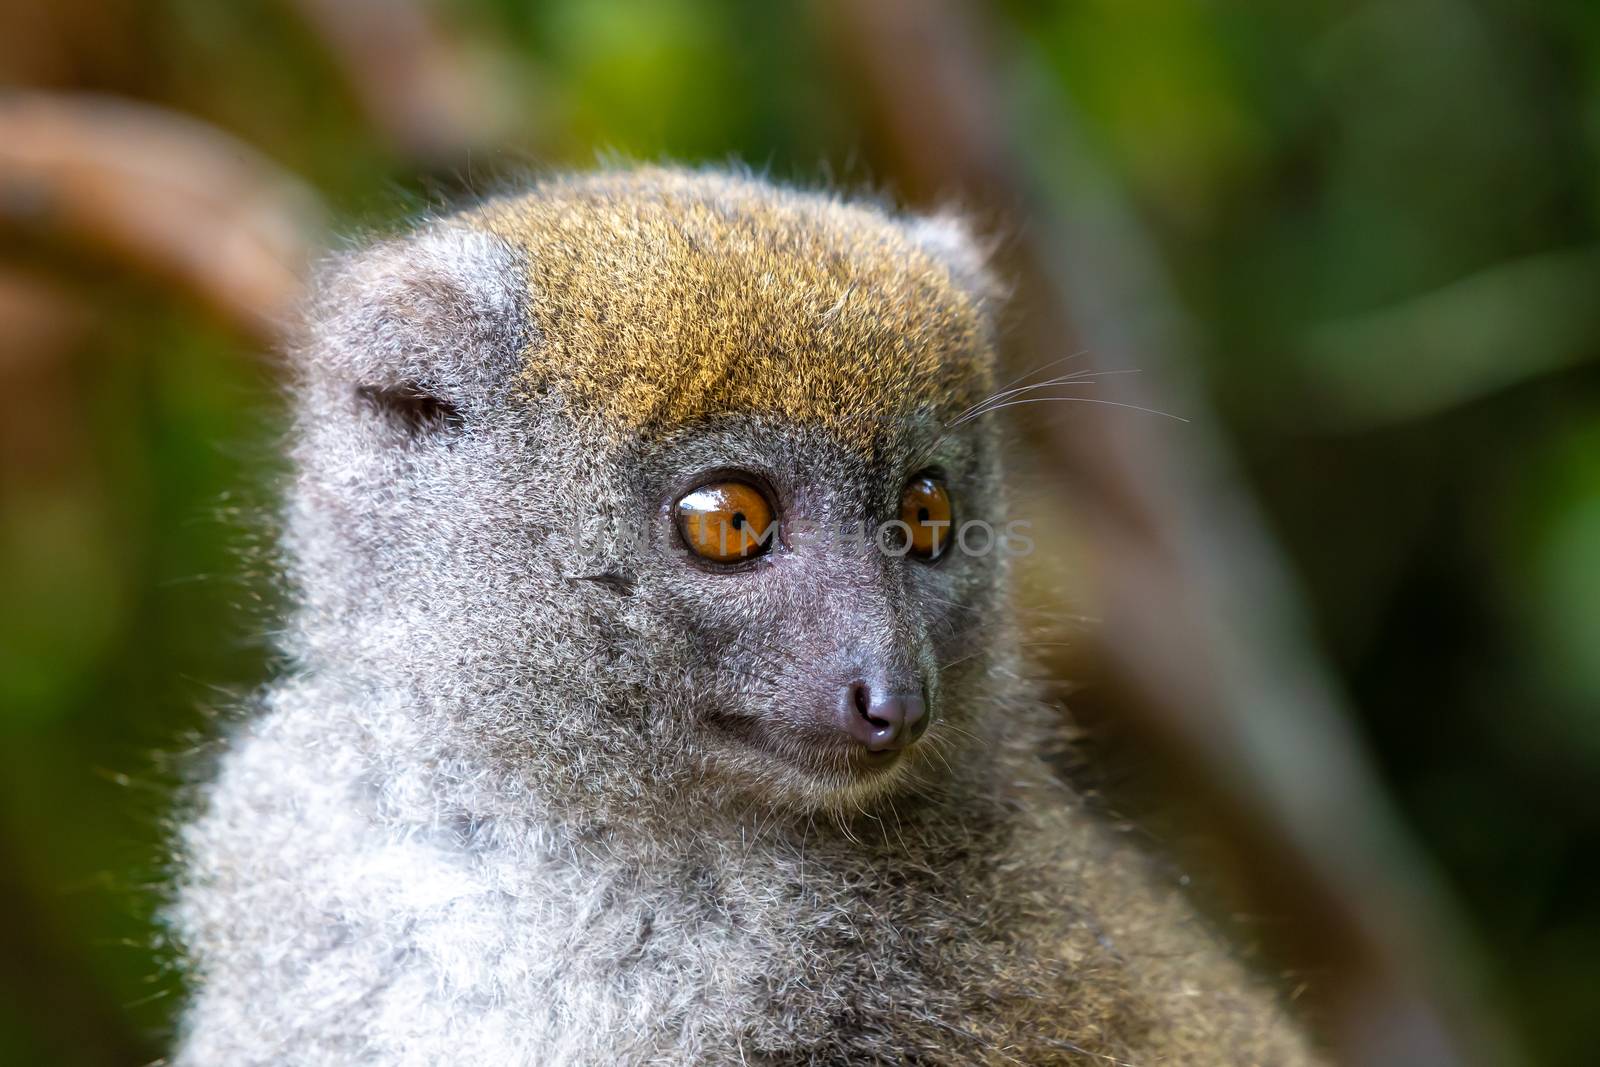 A Portrait of a bamboo lemur in its natural environment